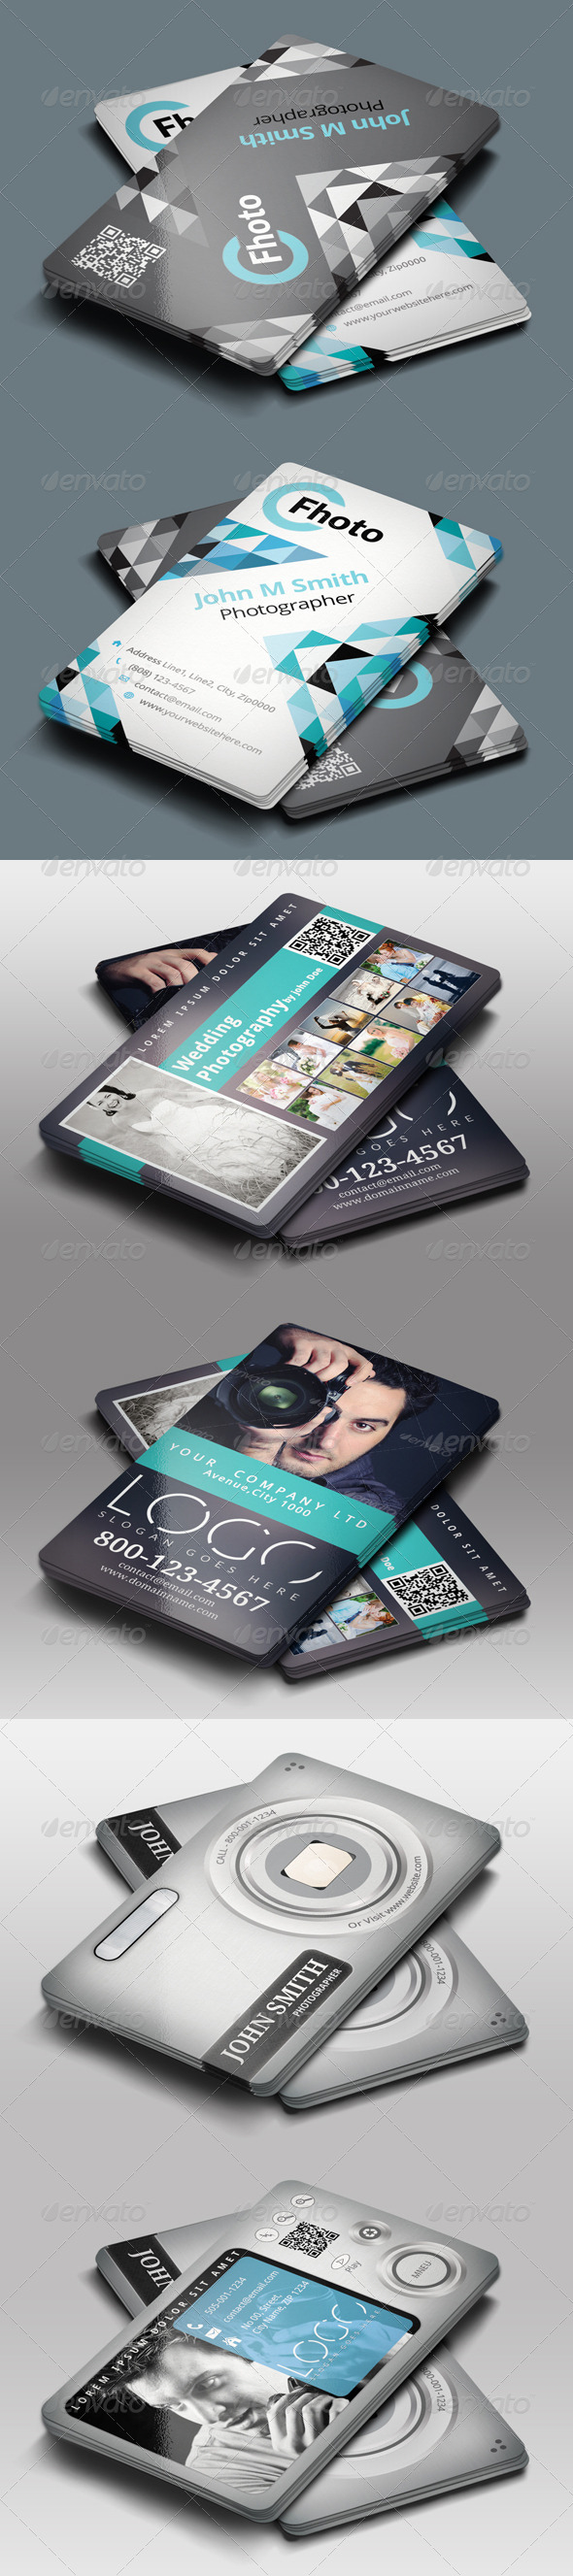 3in1 Photography Business Cards Bundle